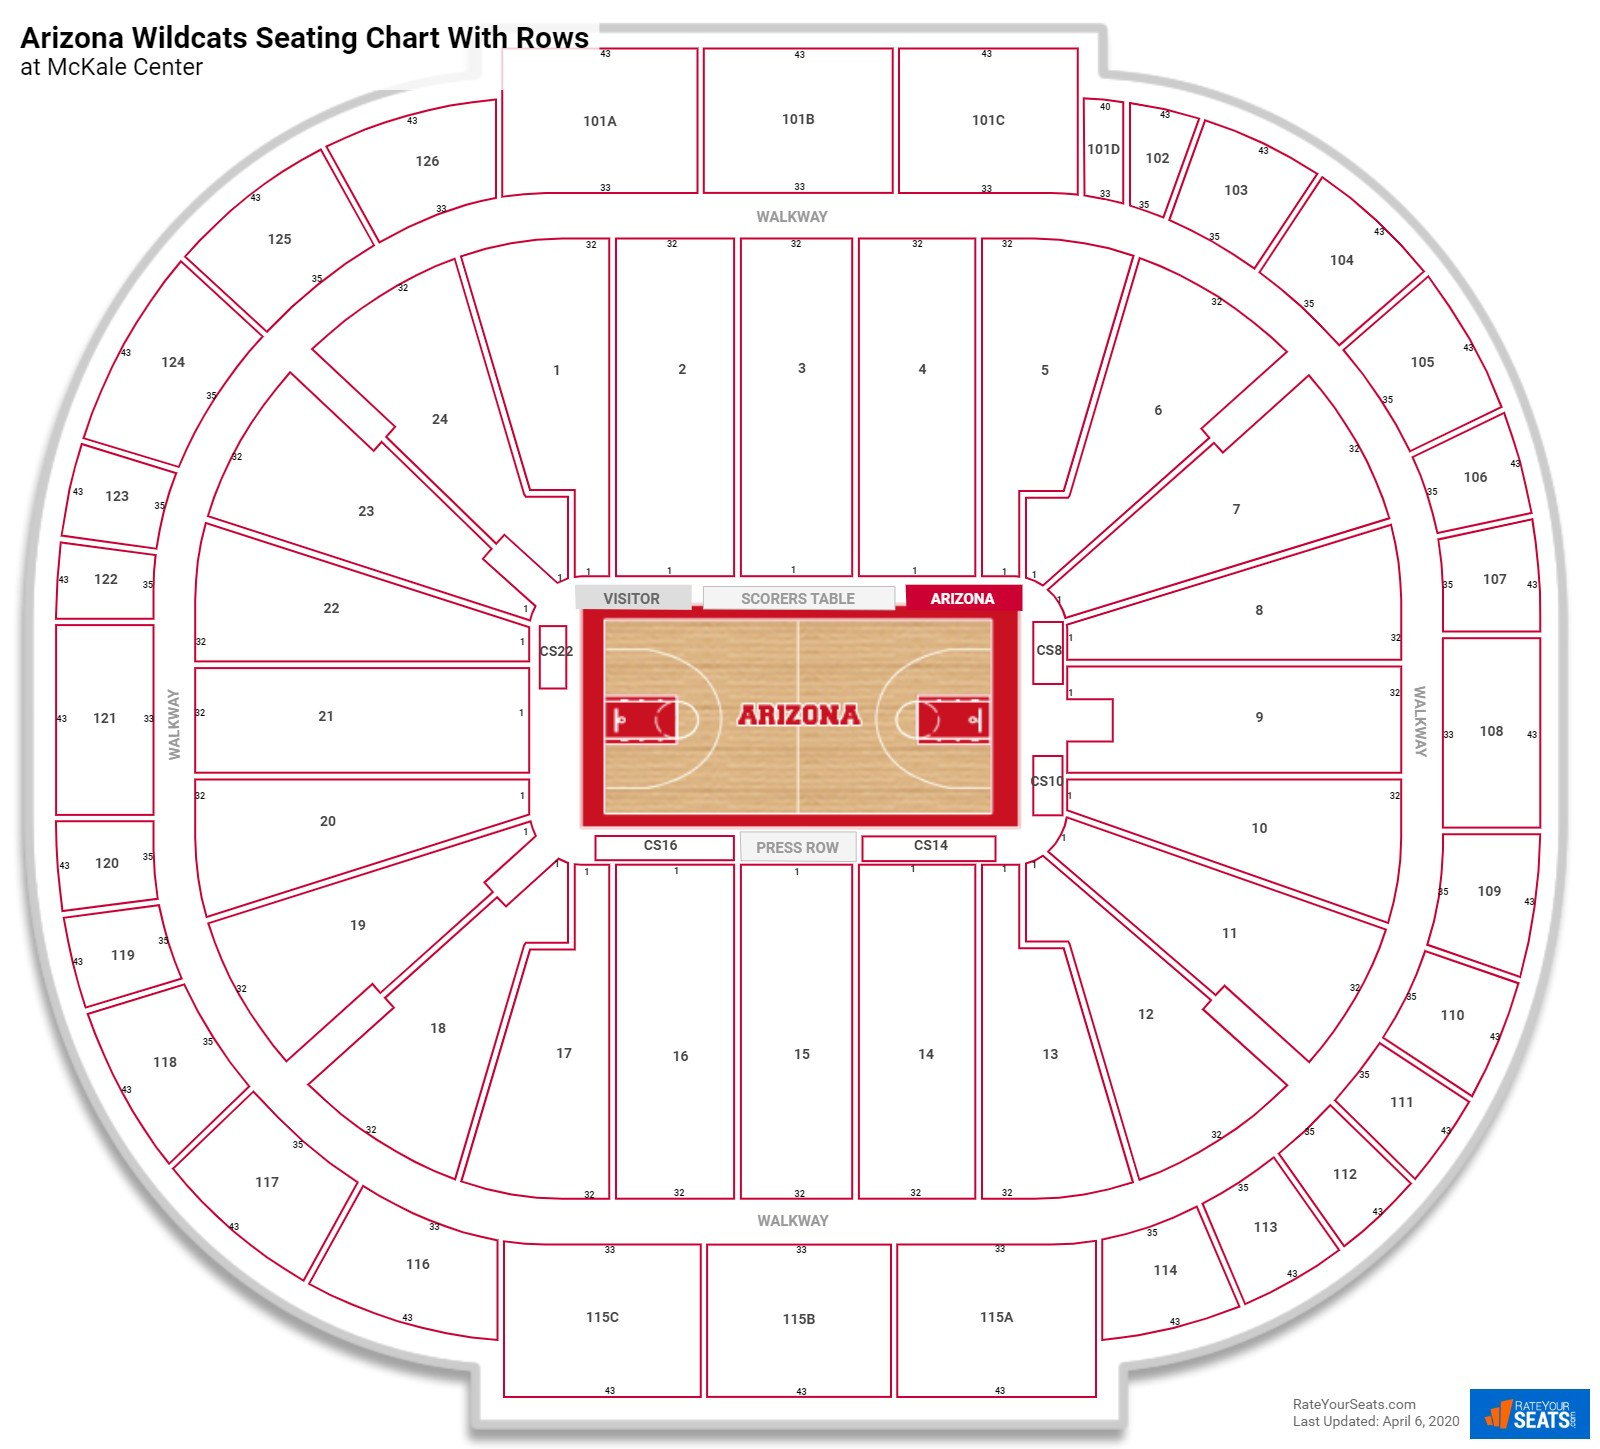 McKale Center Seating Charts - RateYourSeats.com